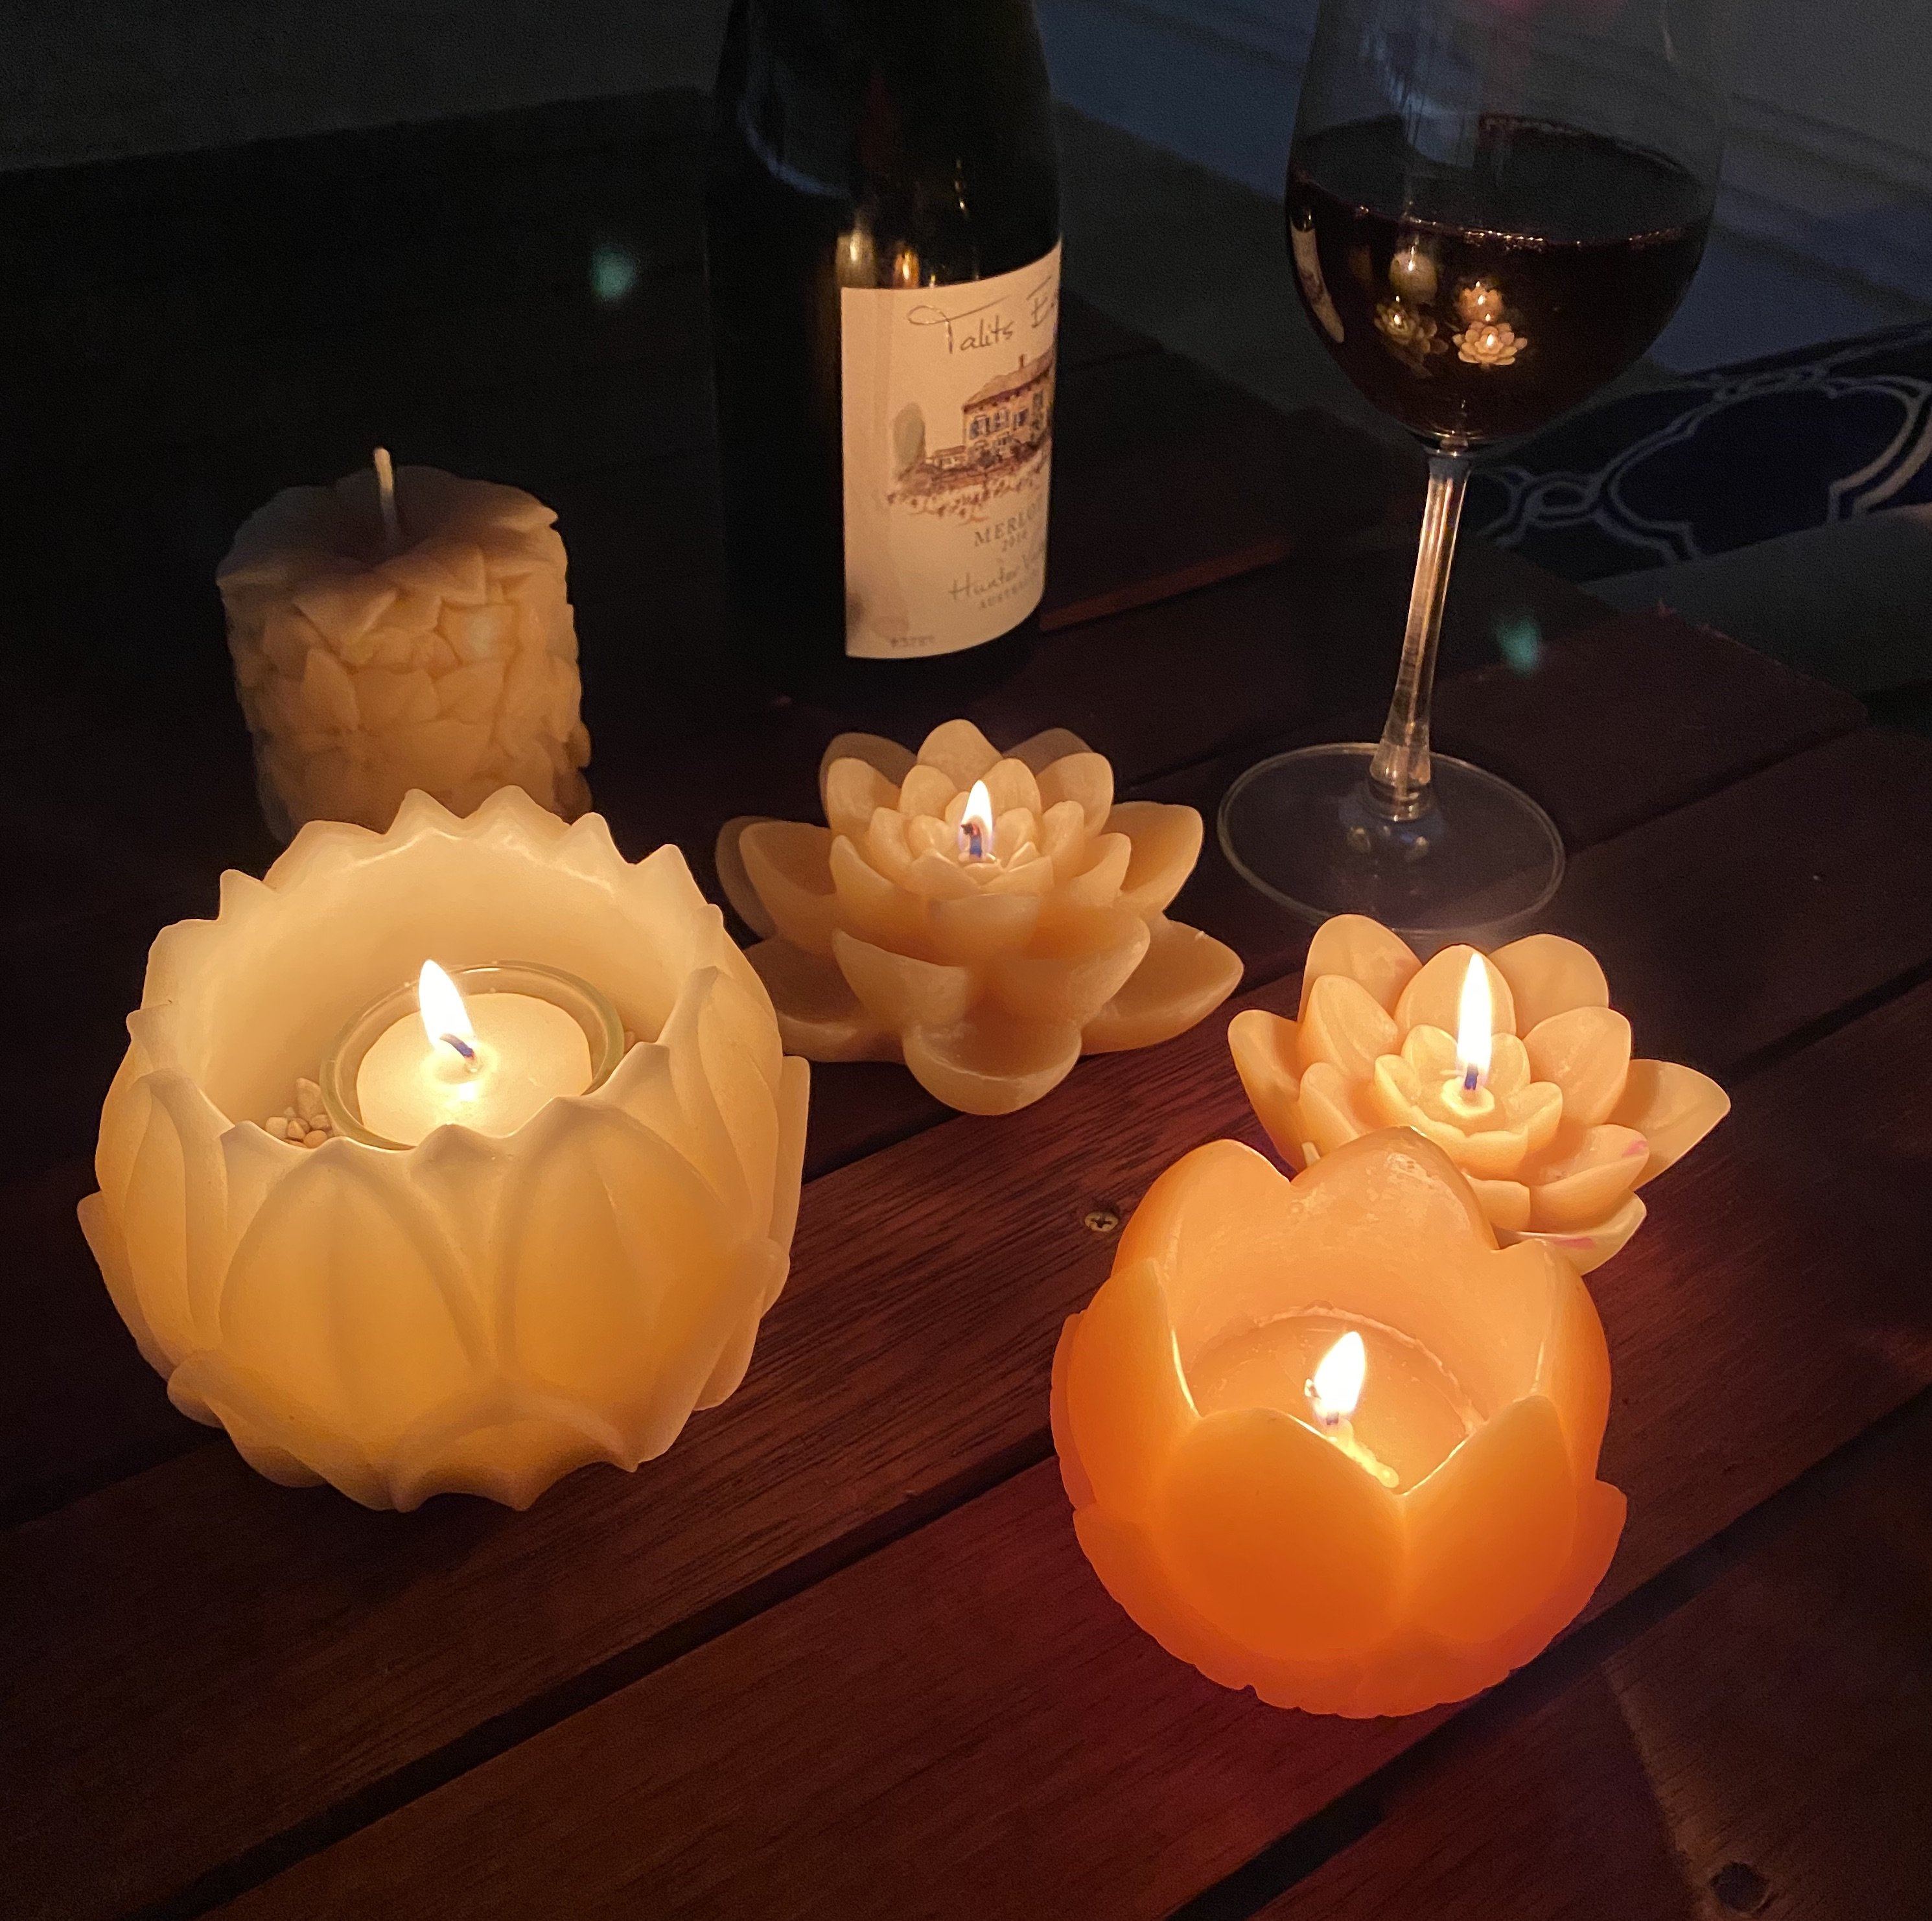 Flowers, lotus candles